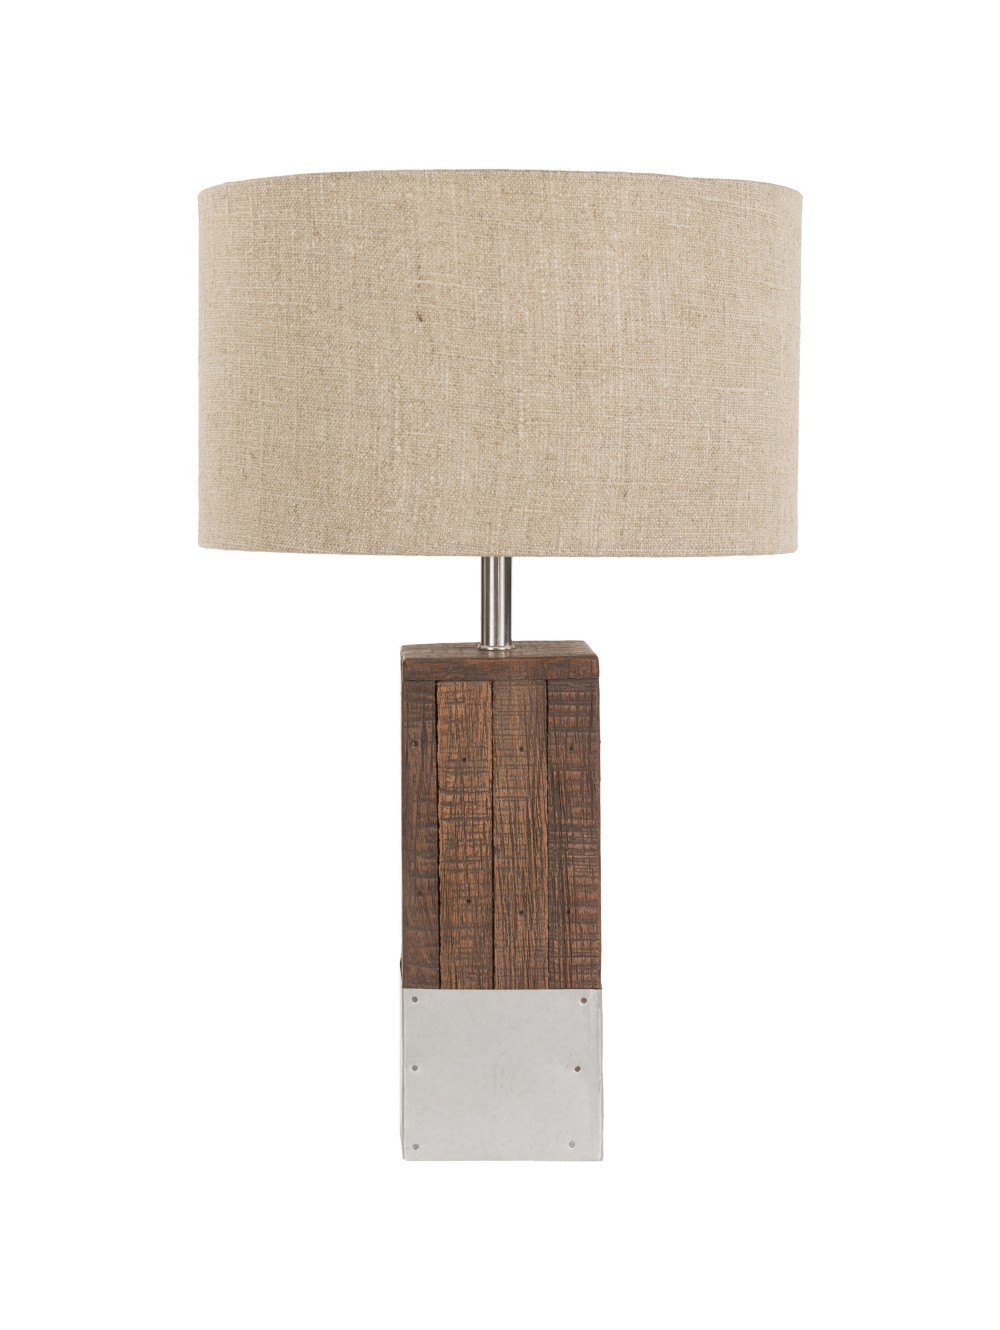 ANSEL TABLE LAMP - Image 0